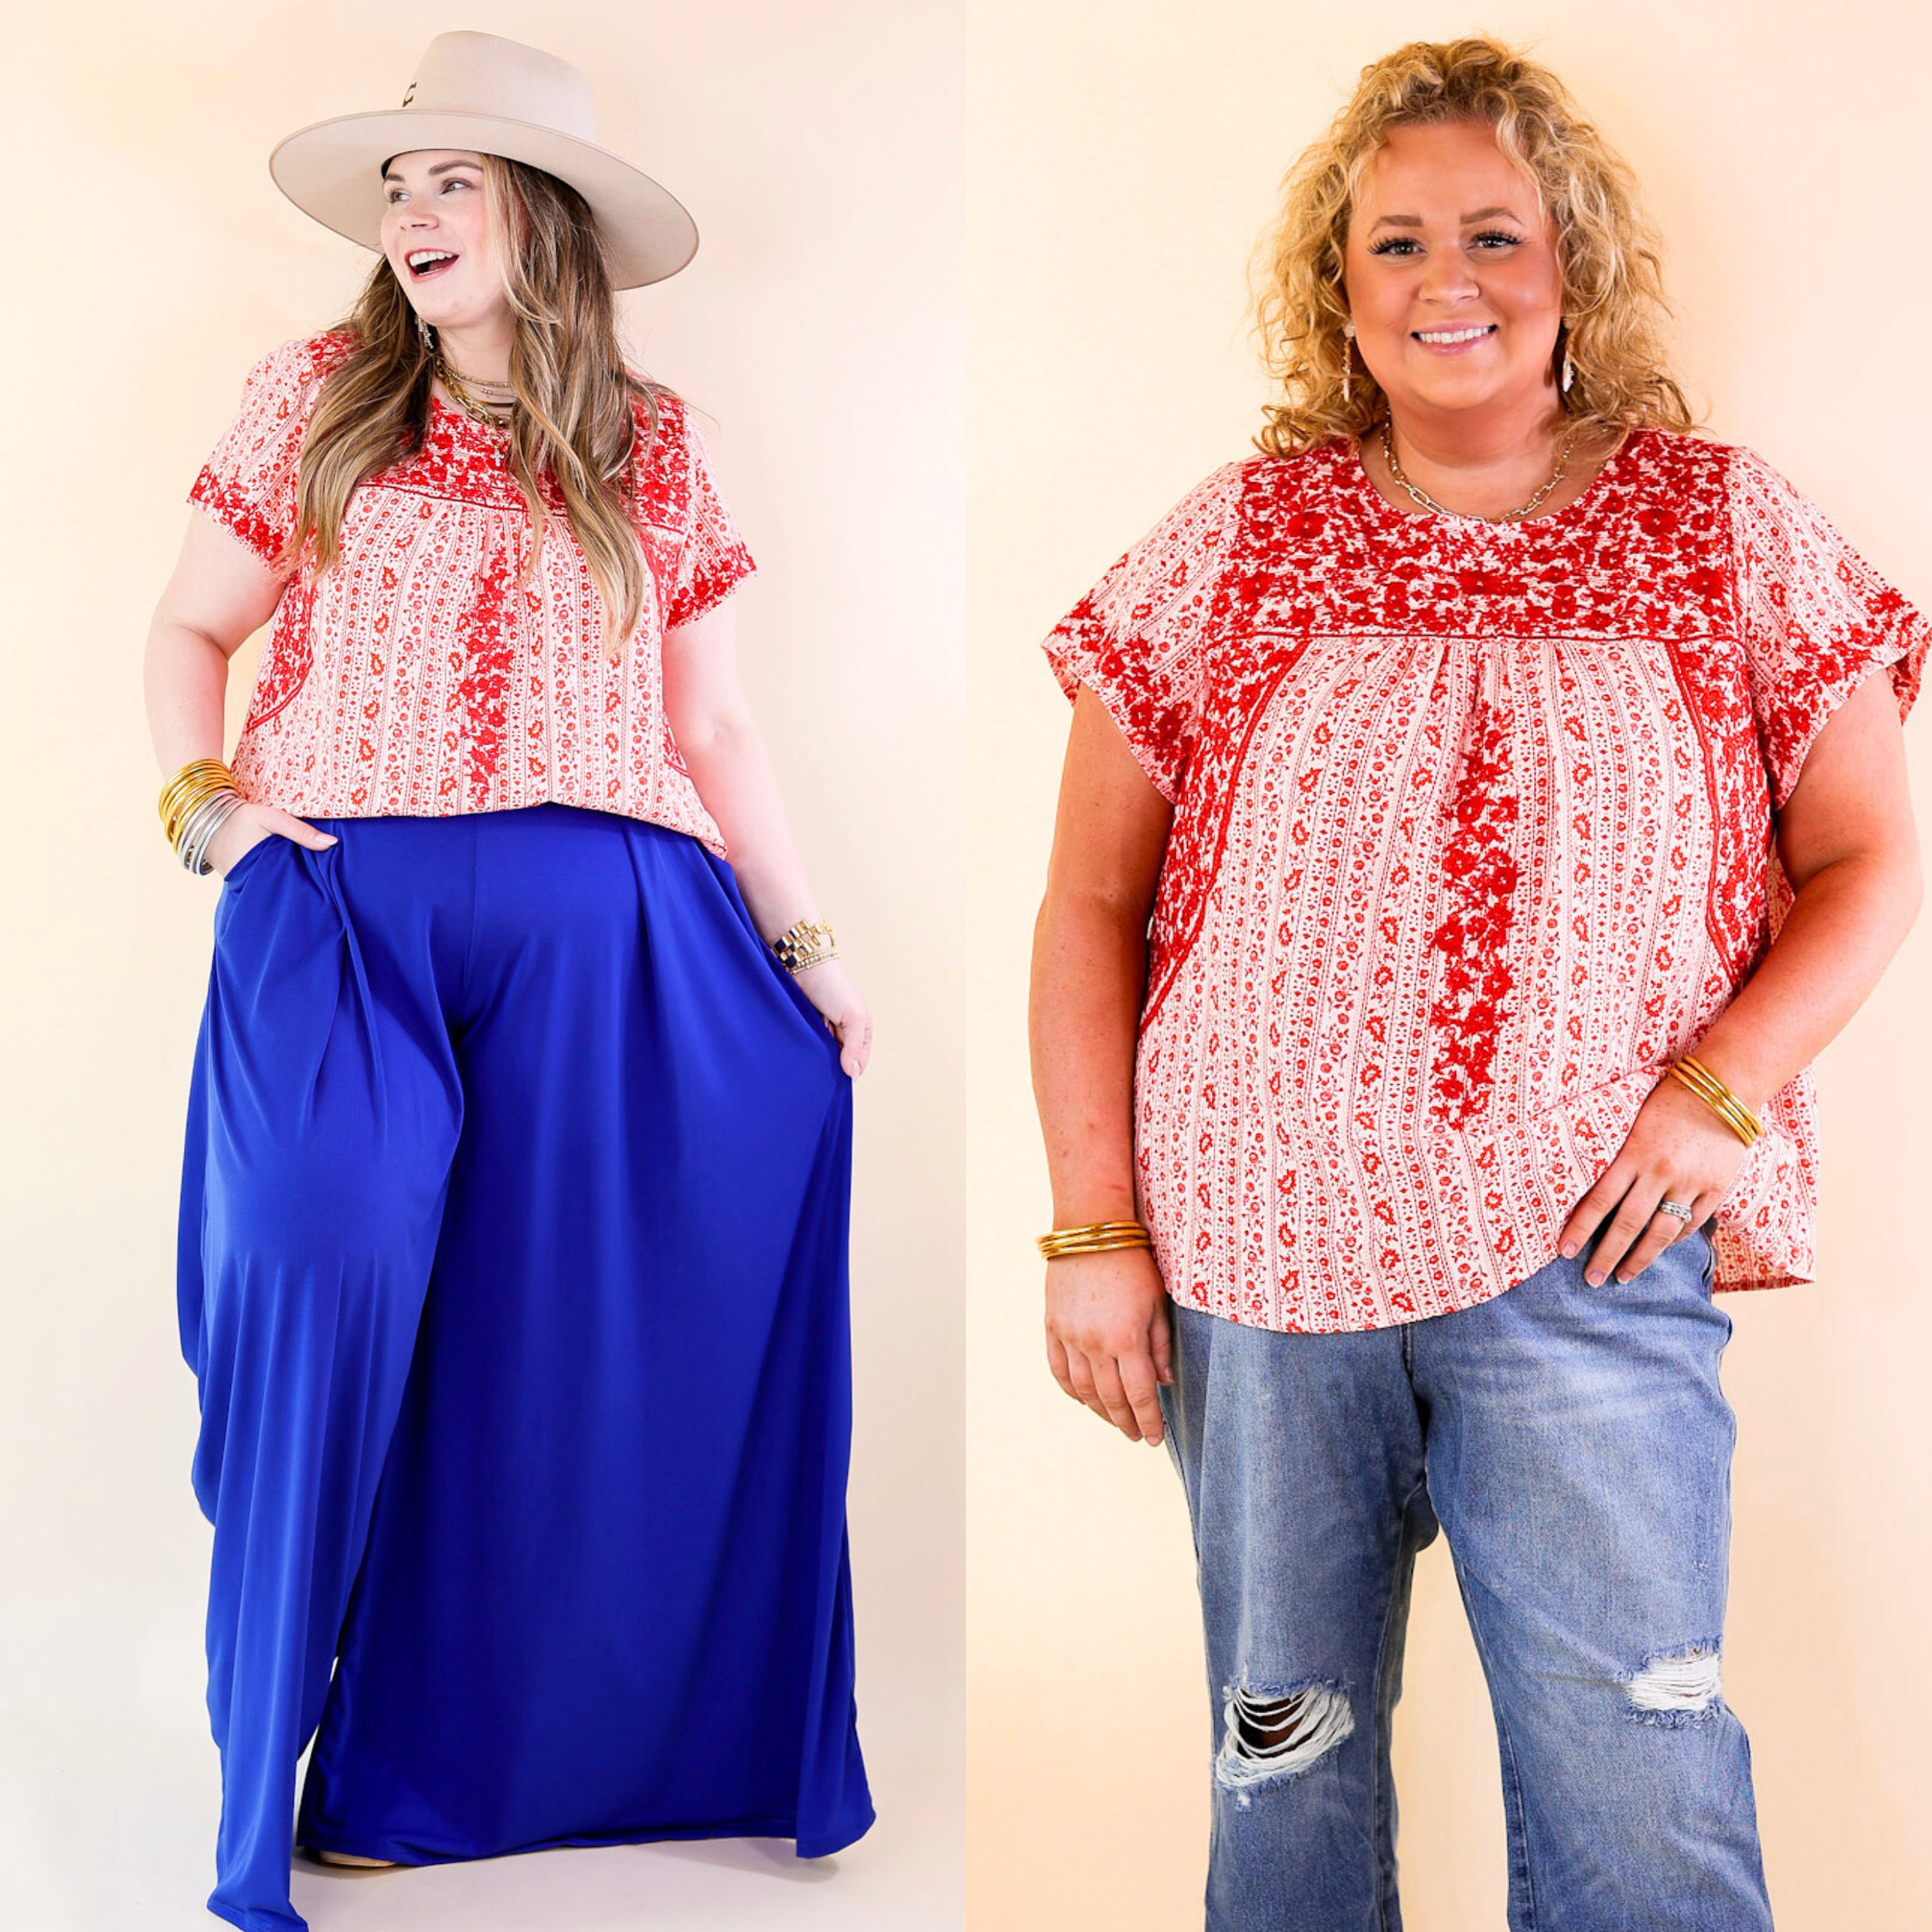 Sunny Day Floral Print Top with Red Floral Embroidery in Off White - Giddy Up Glamour Boutique